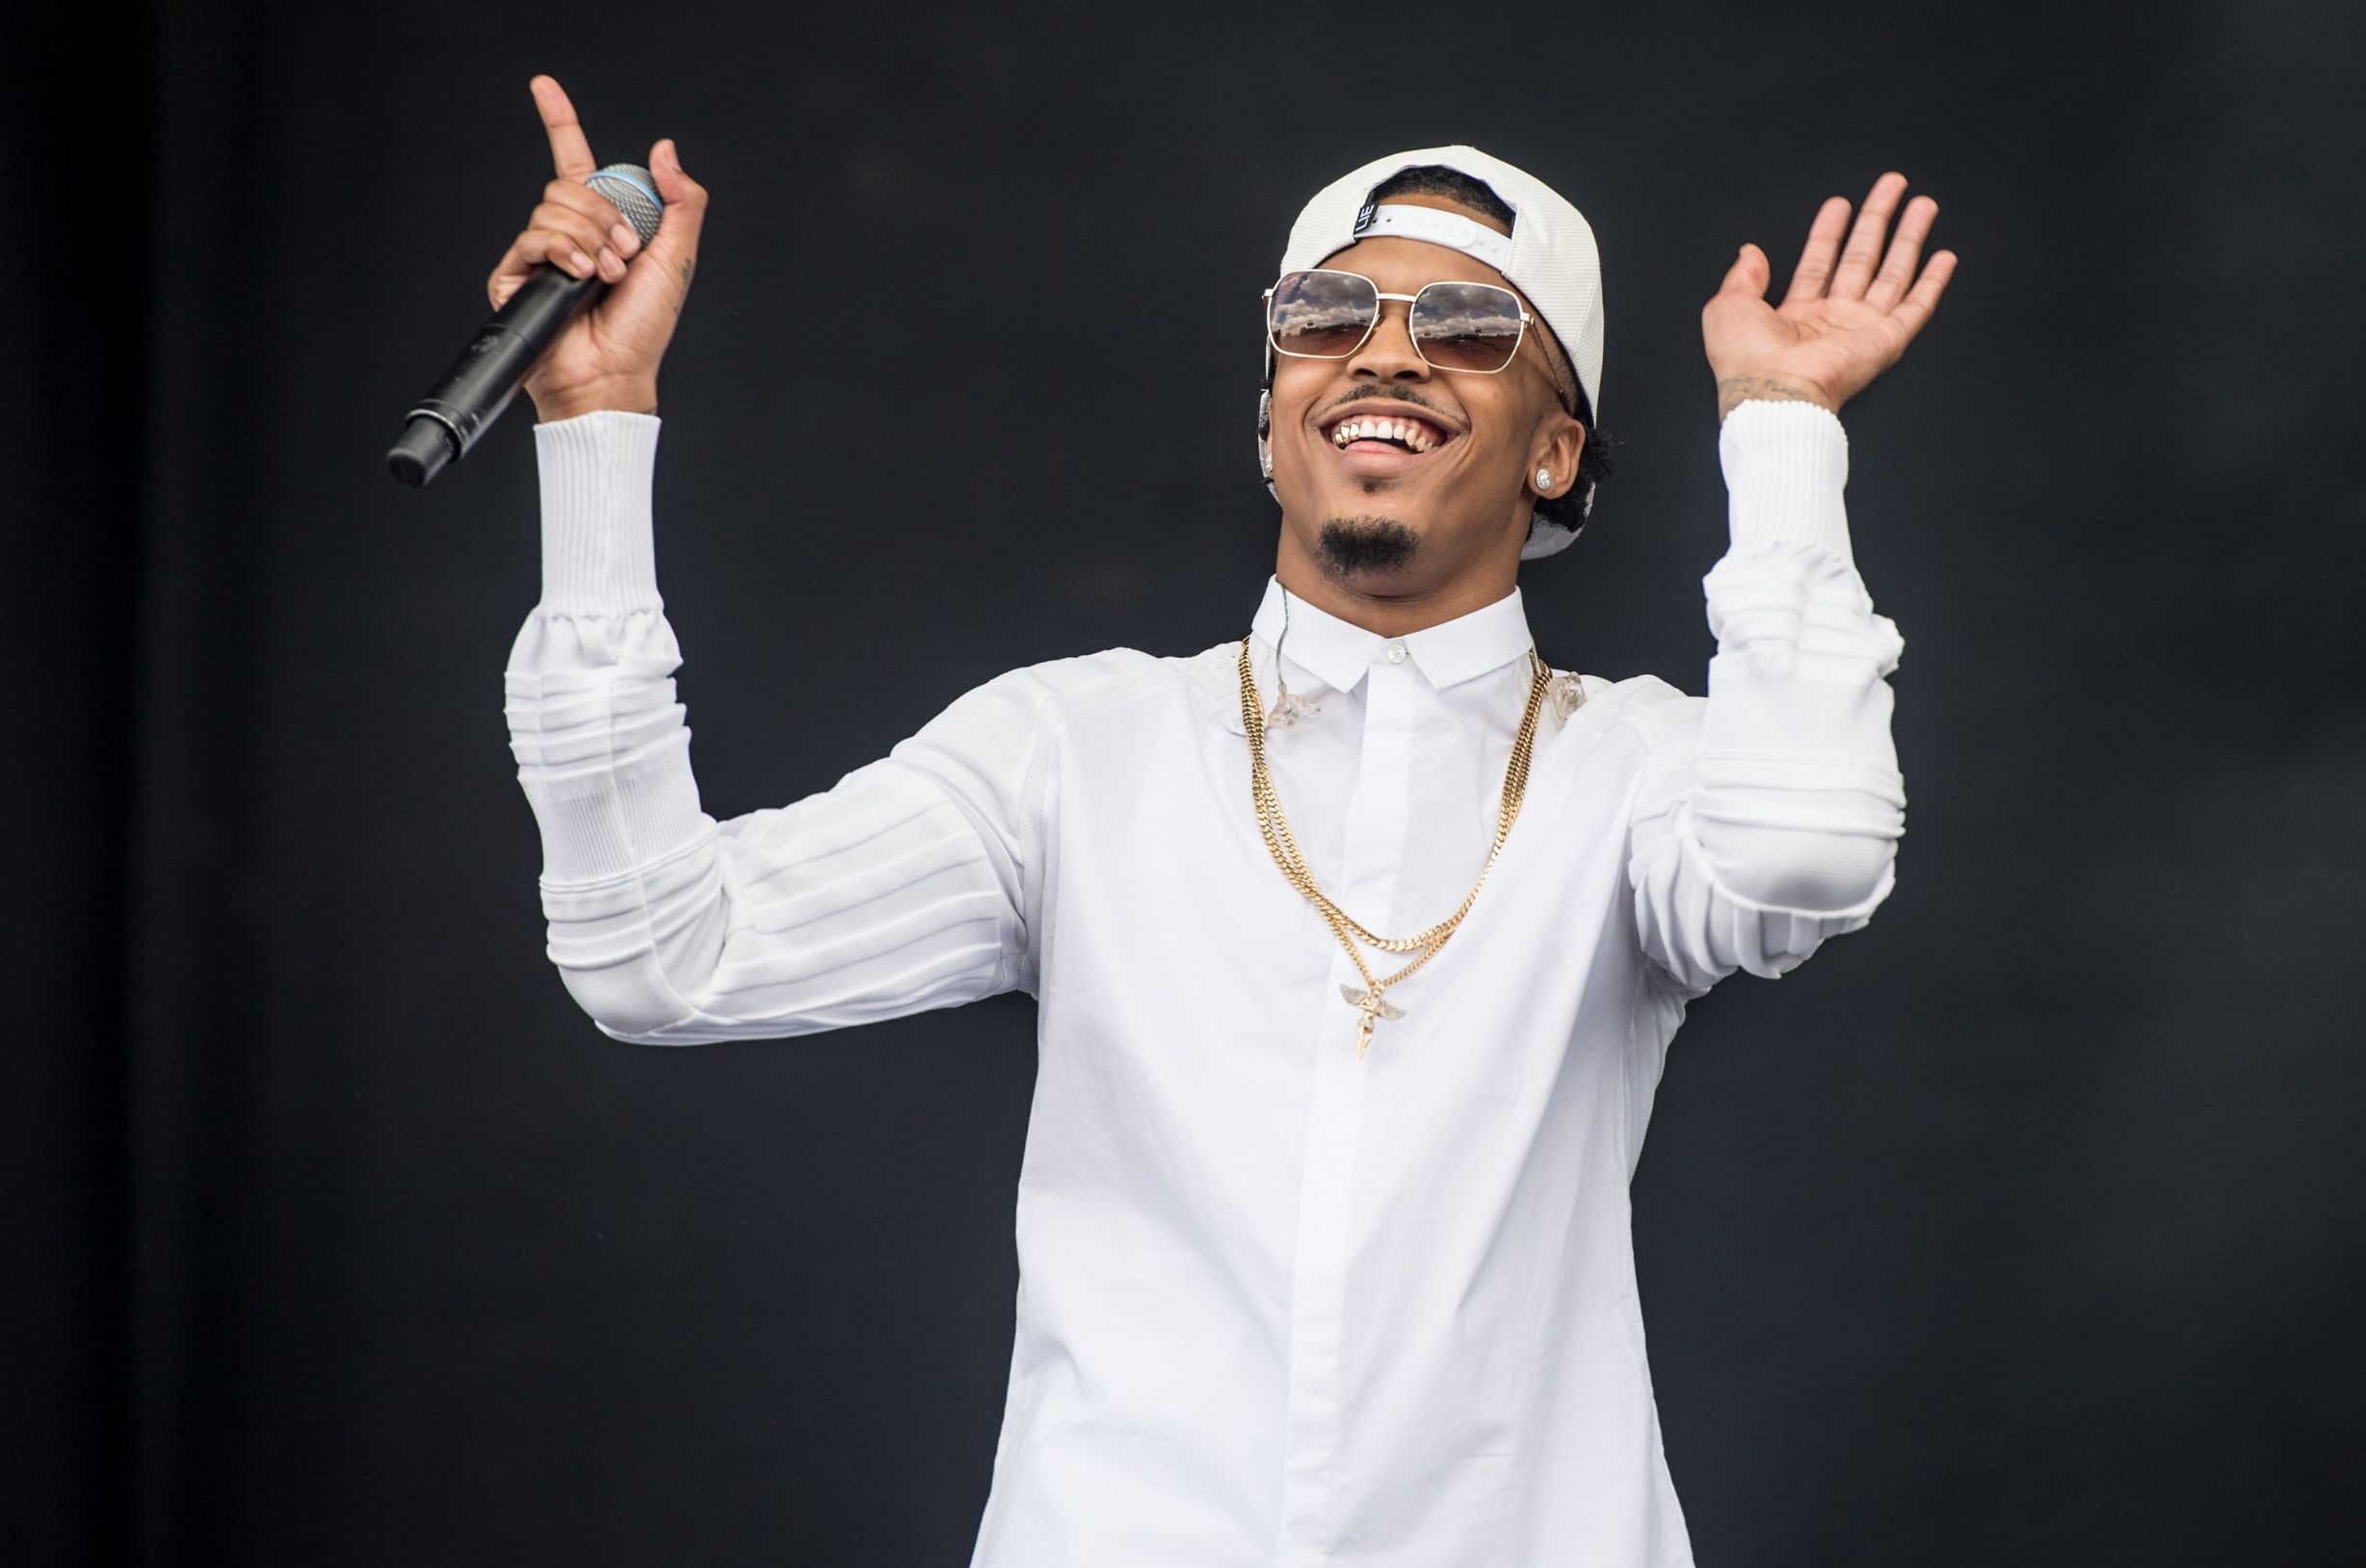 (4895765ag)
August Alsina
New Look Wireless Festival, Finsbury Park, London, Britain - 05 Jul 2015,Image: 251940170, License: Rights-managed, Restrictions: , Model Release: no, Credit line: - / Shutterstock Editorial / Profimedia